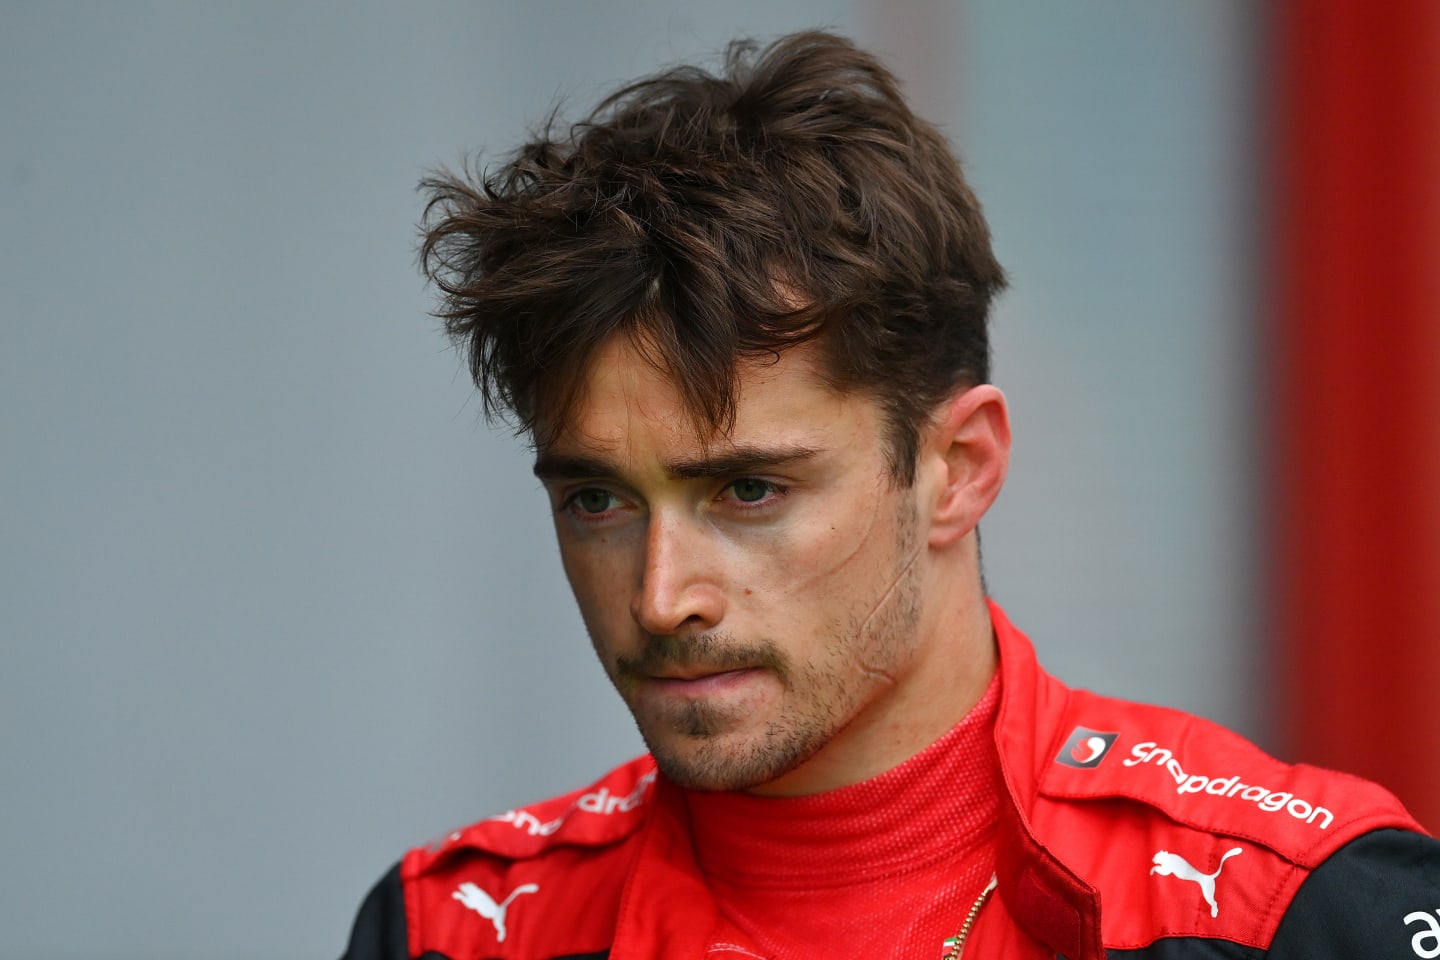 IMOLA, ITALY - APRIL 24: 6th placed Charles Leclerc of Monaco and Ferrari looks dejected in parc ferme after spinning out from third position with 10 laps remaining during the F1 Grand Prix of Emilia Romagna at Autodromo Enzo e Dino Ferrari on April 24, 2022 in Imola, Italy. (Photo by Dan Mullan/Getty Images)